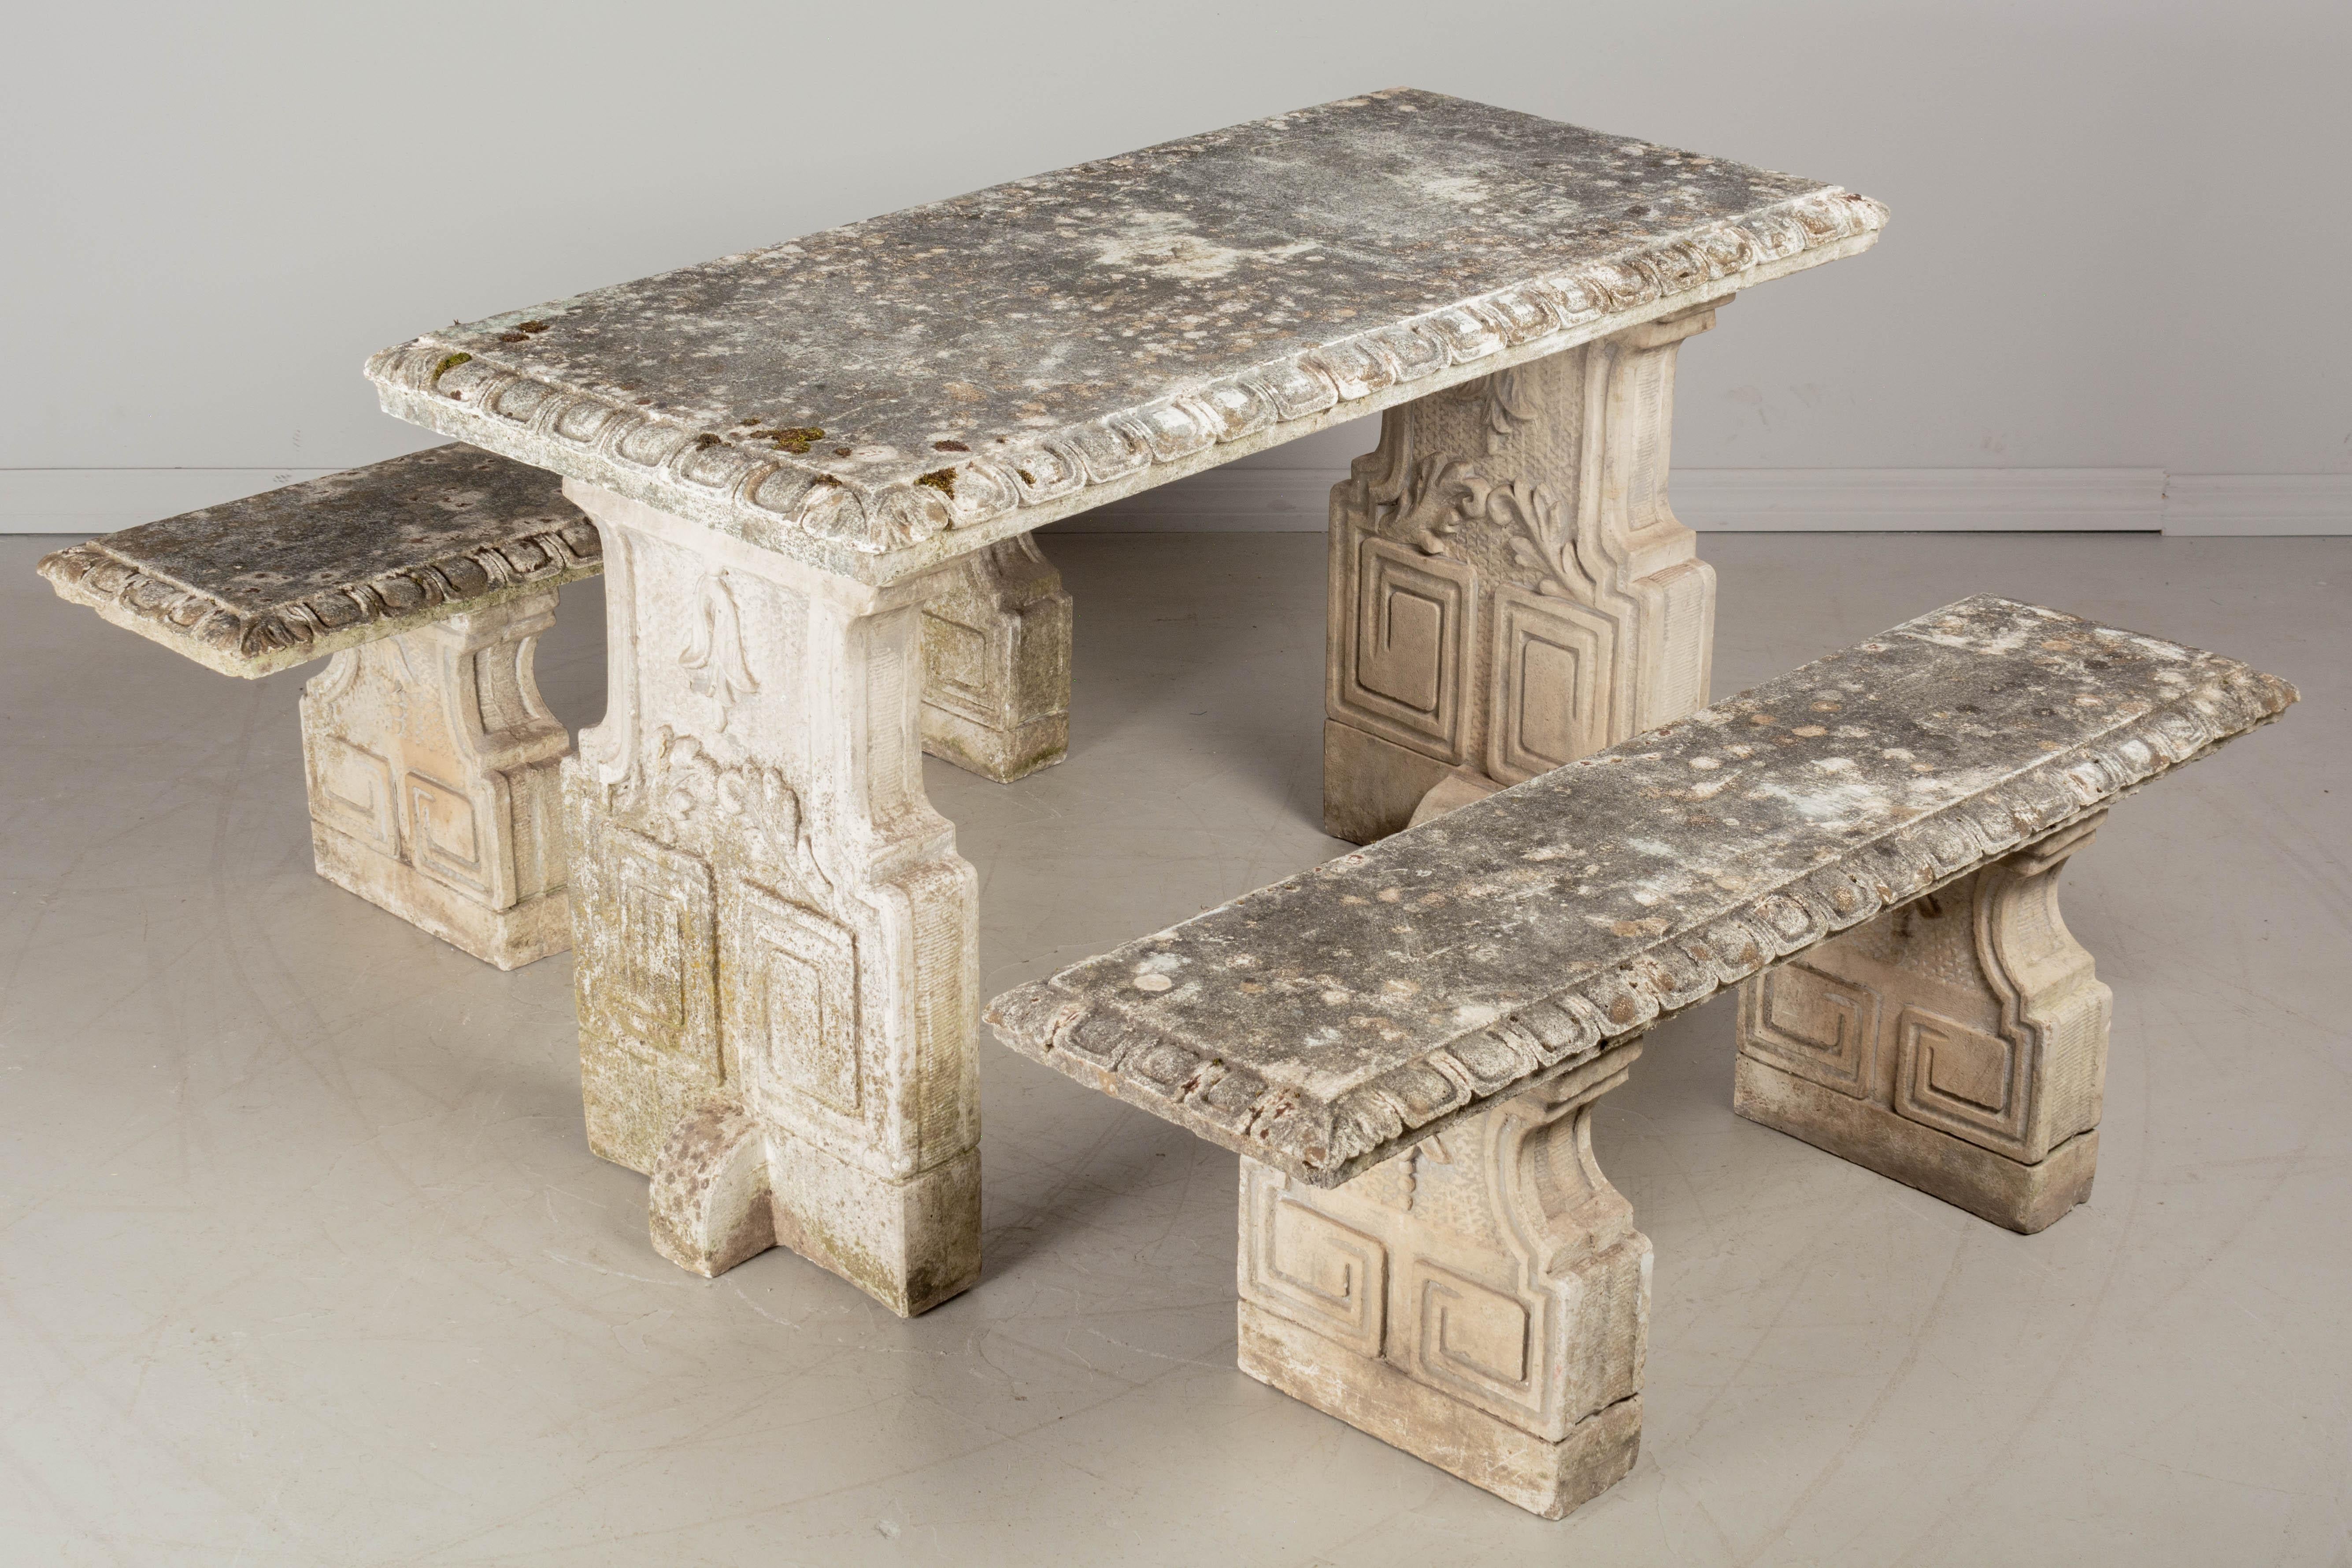 Vintage French Concrete Garden Table and Bench Set In Good Condition For Sale In Winter Park, FL